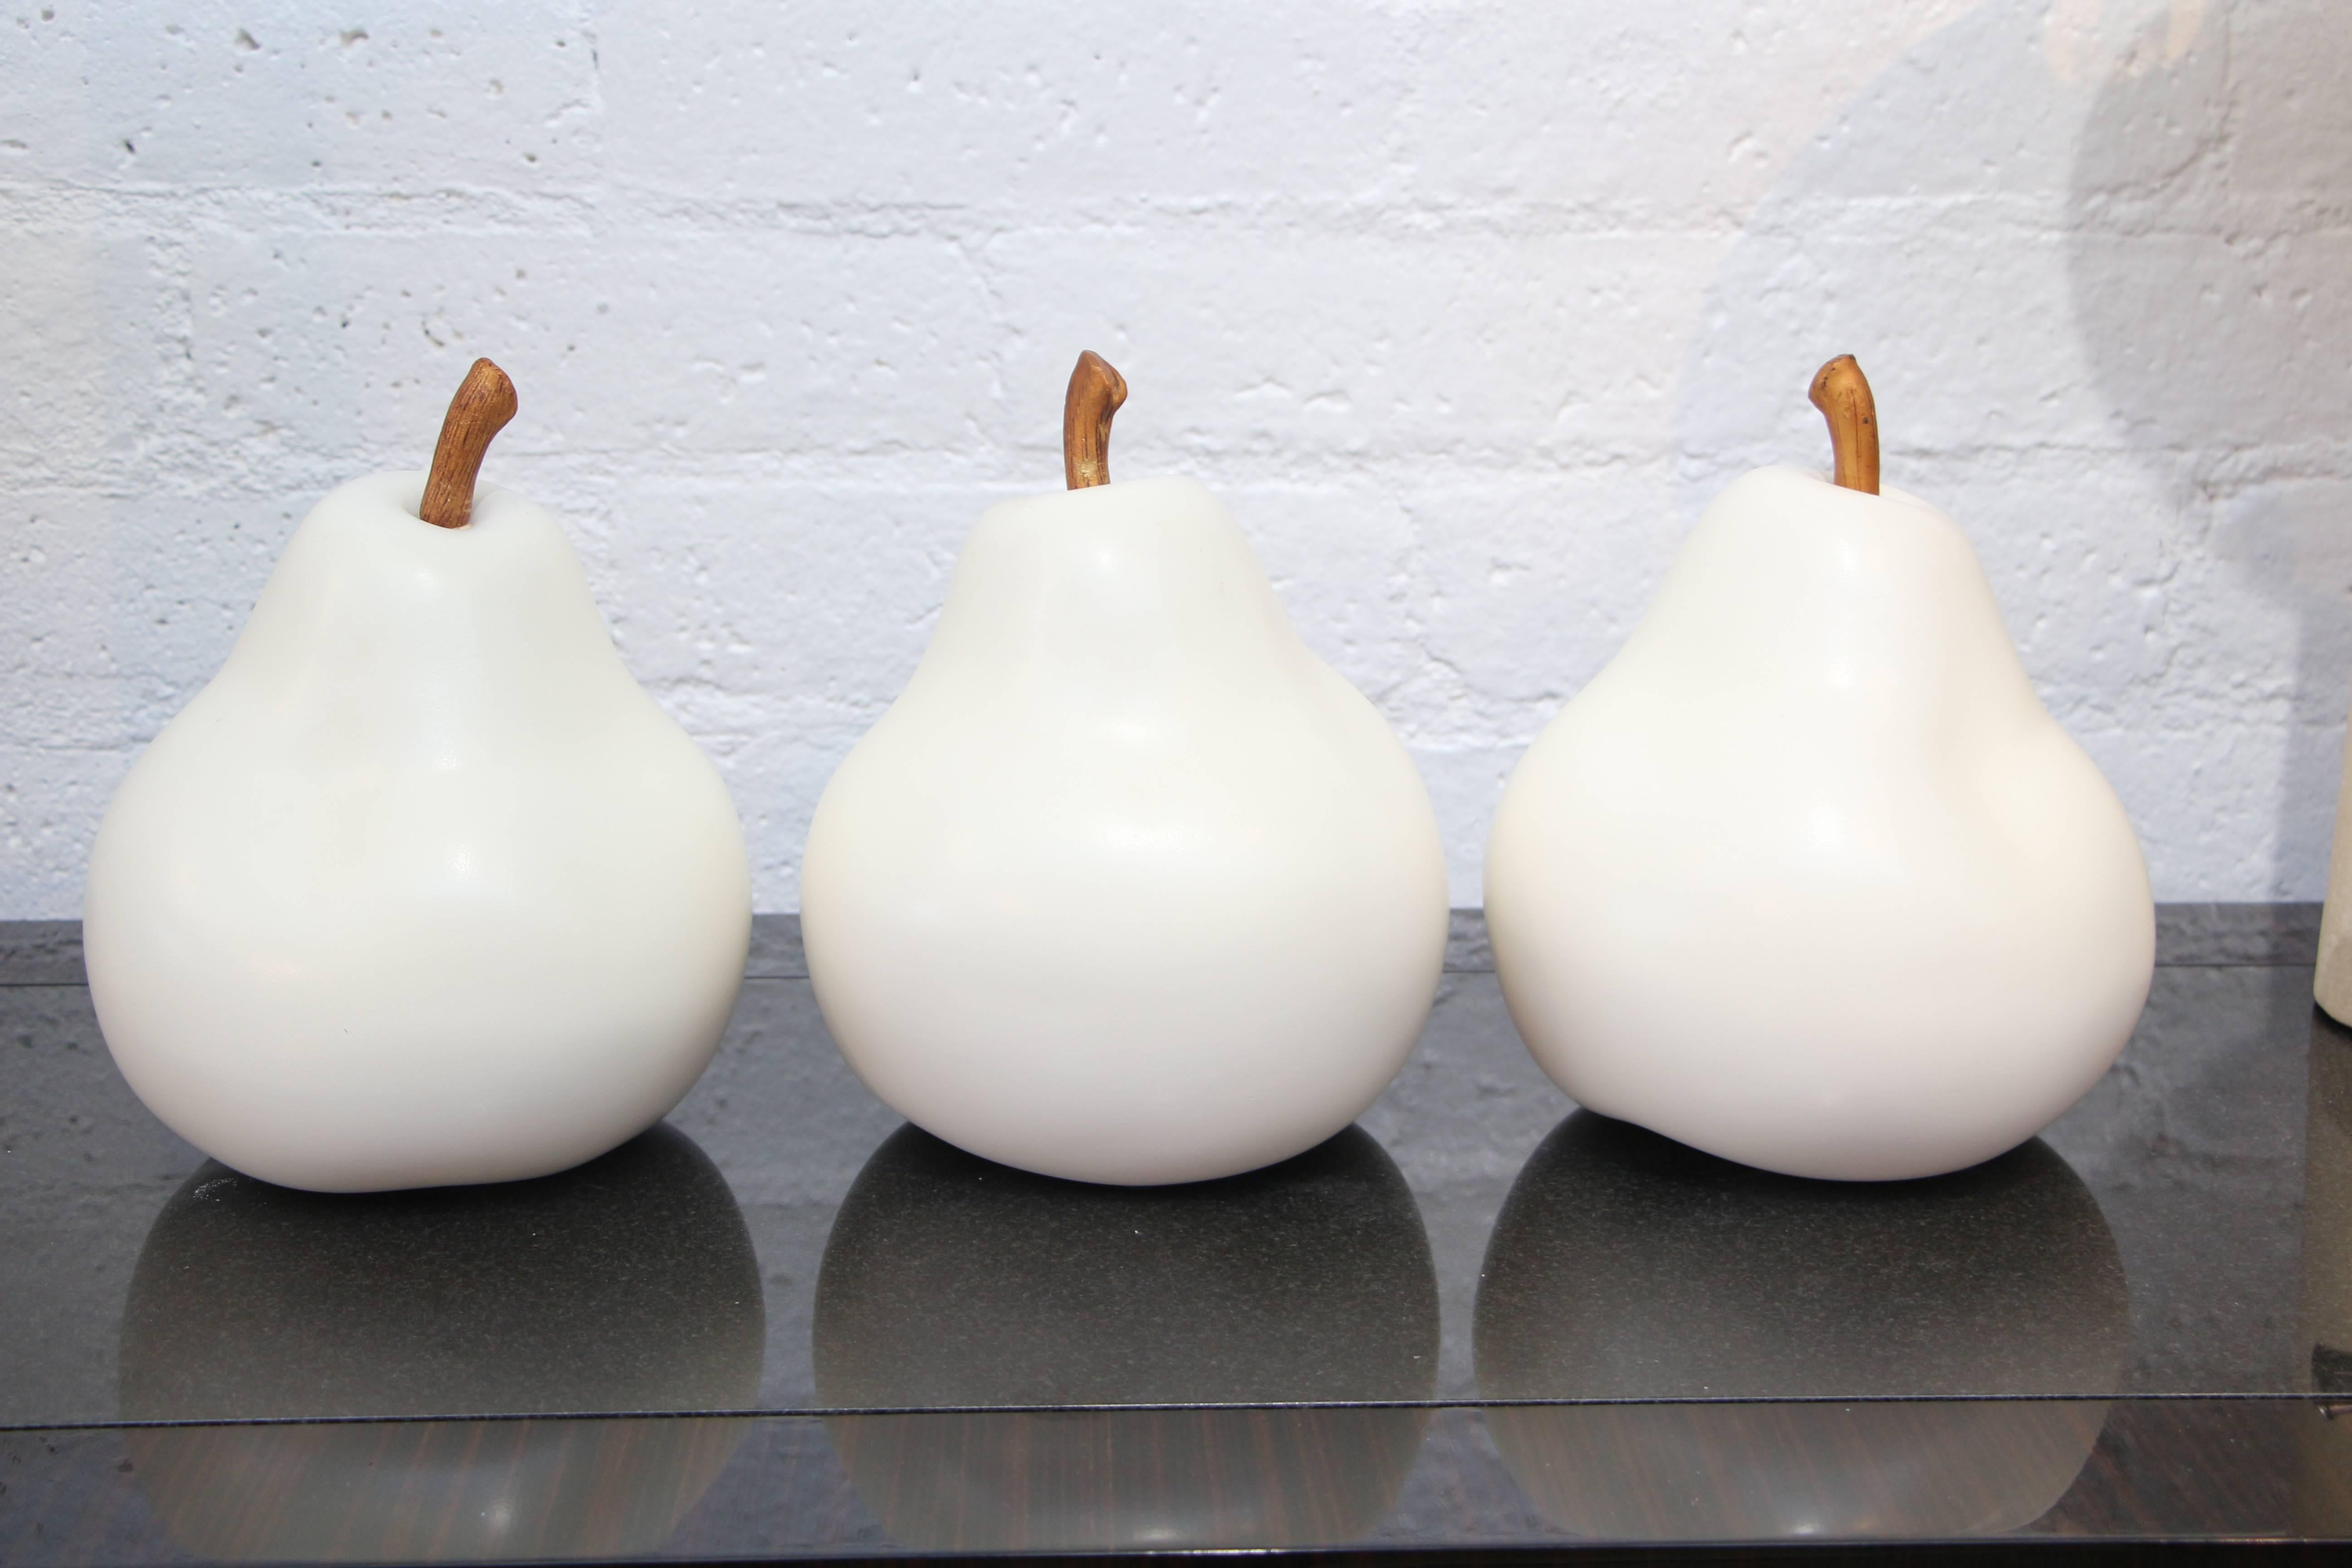 Three great ceramic pears. We have had this in quite a few sizes. The stems appear to have been glided at some point. Unique mark on base.